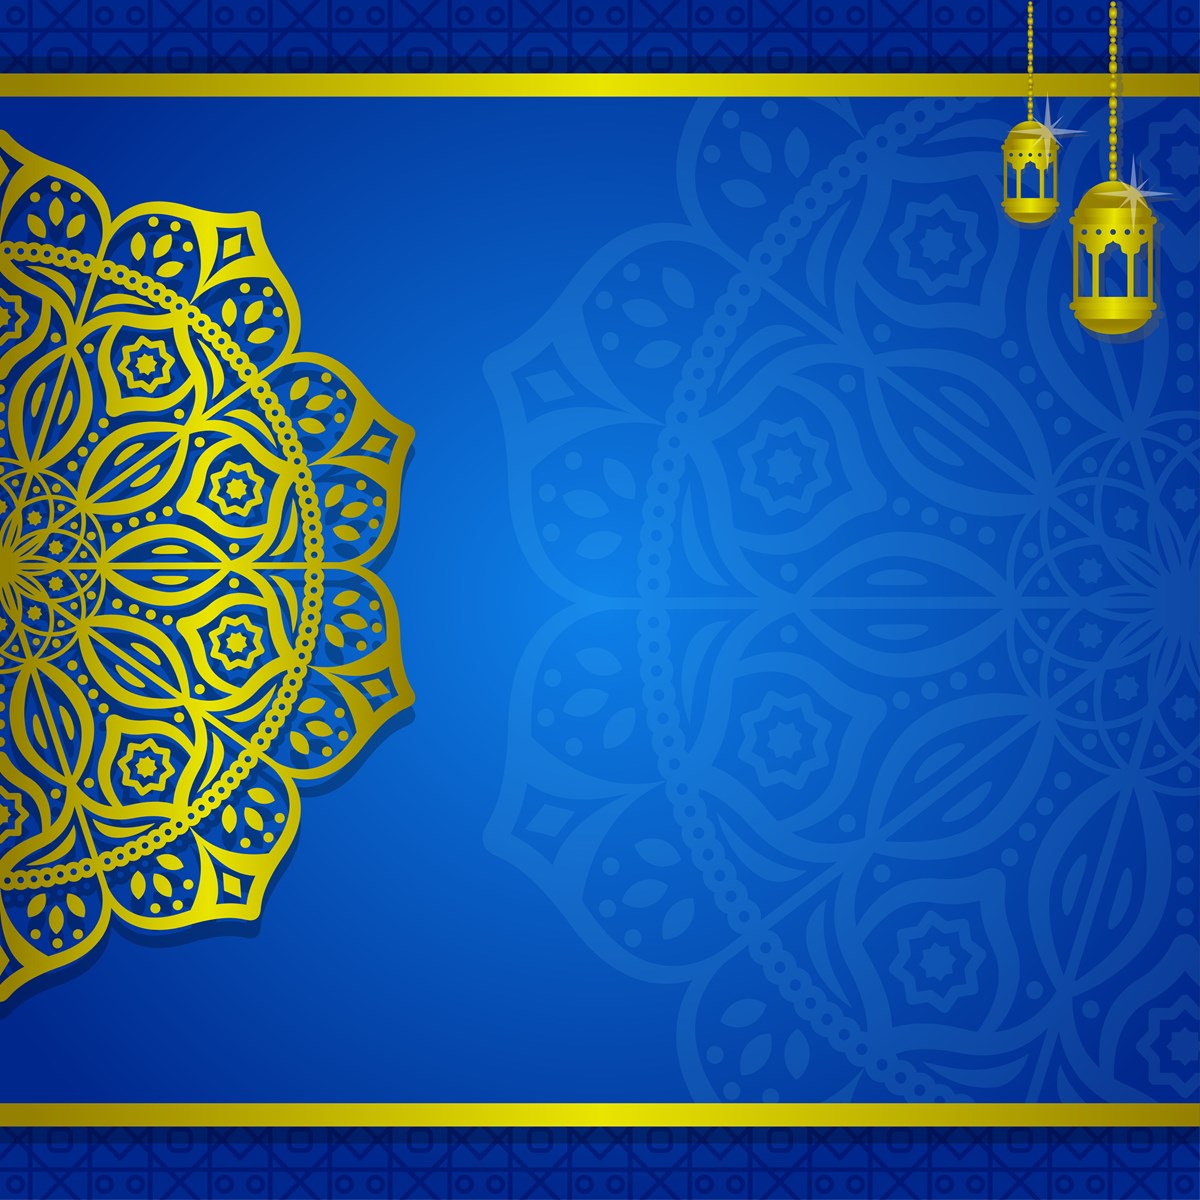 Blue islamic background with lantern and mandala decoration suitable for a Ramadan card.